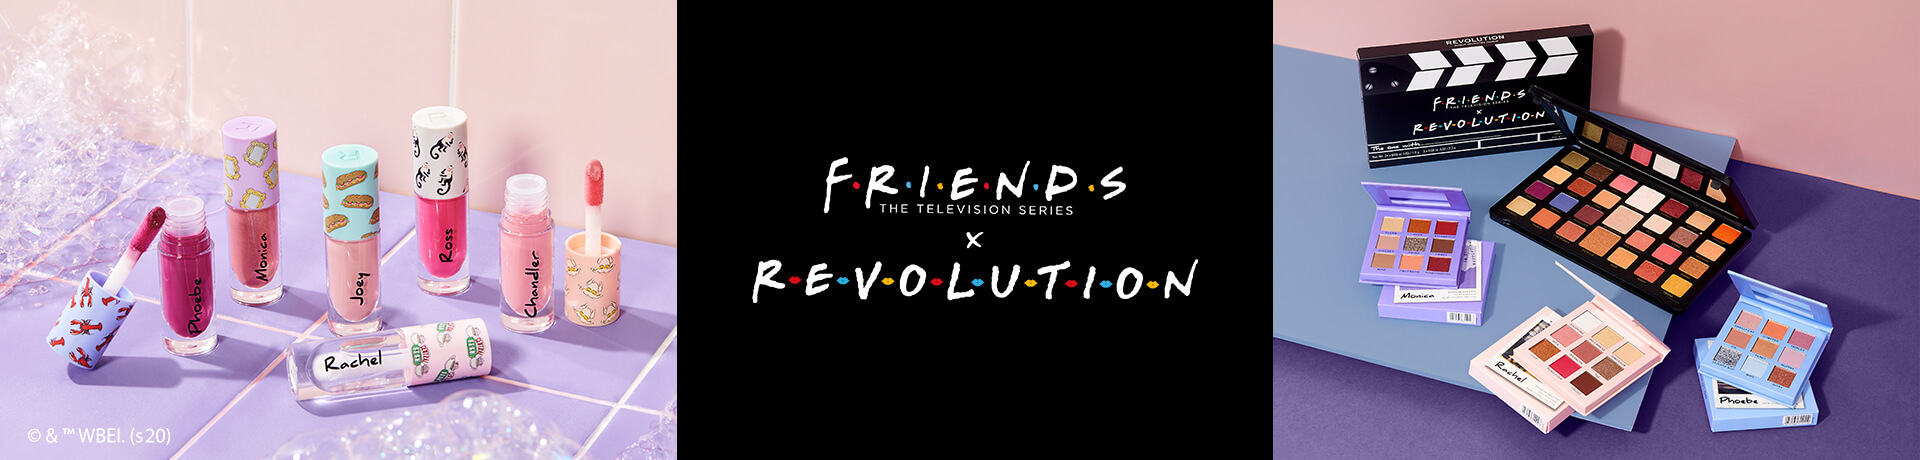 Oh. My. God. Friends x Revolution is HERE!